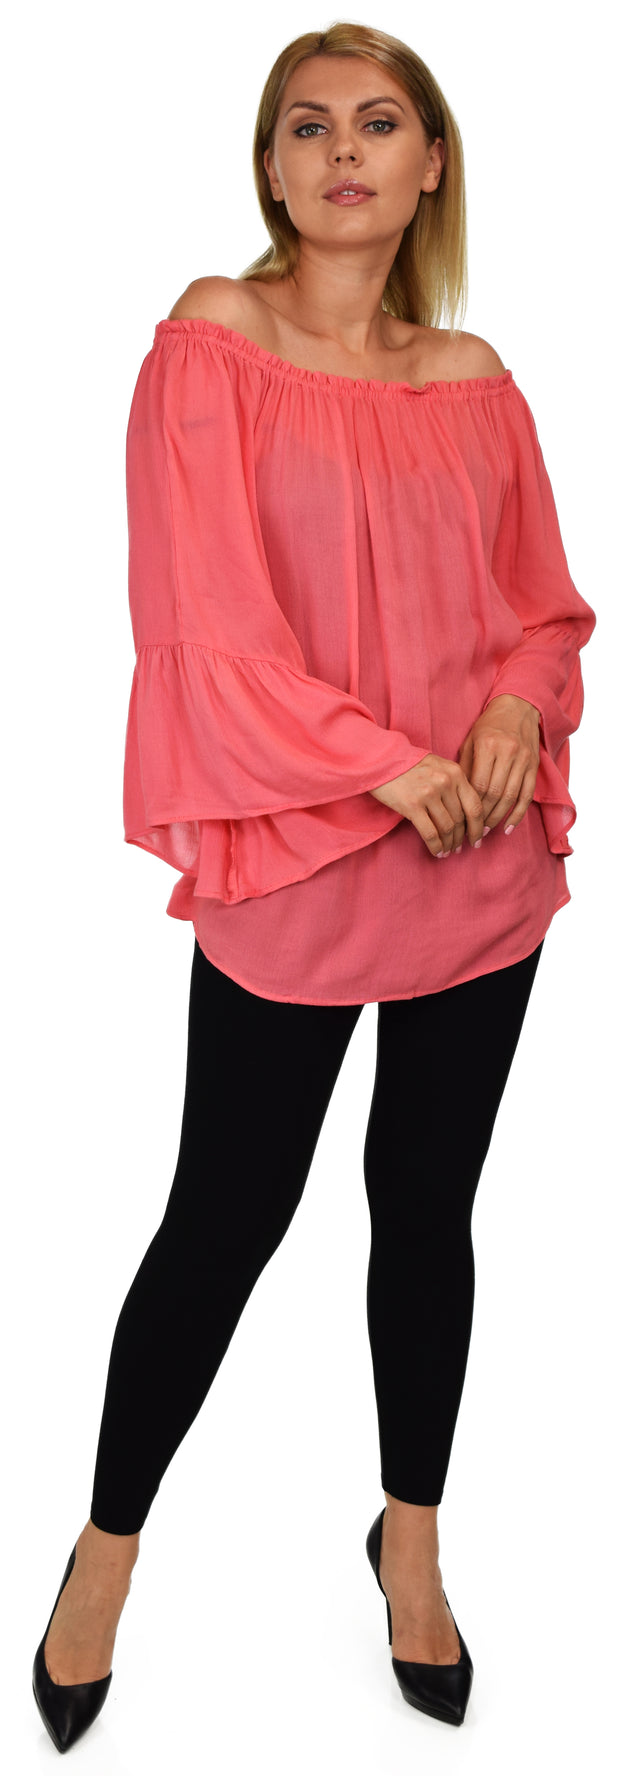 Dare2bstylish On-Off Shoulder Blouse, Peasant blouse, Ruffle Sleeve Blouse, Asymmetrical Blouse. M to 2XL